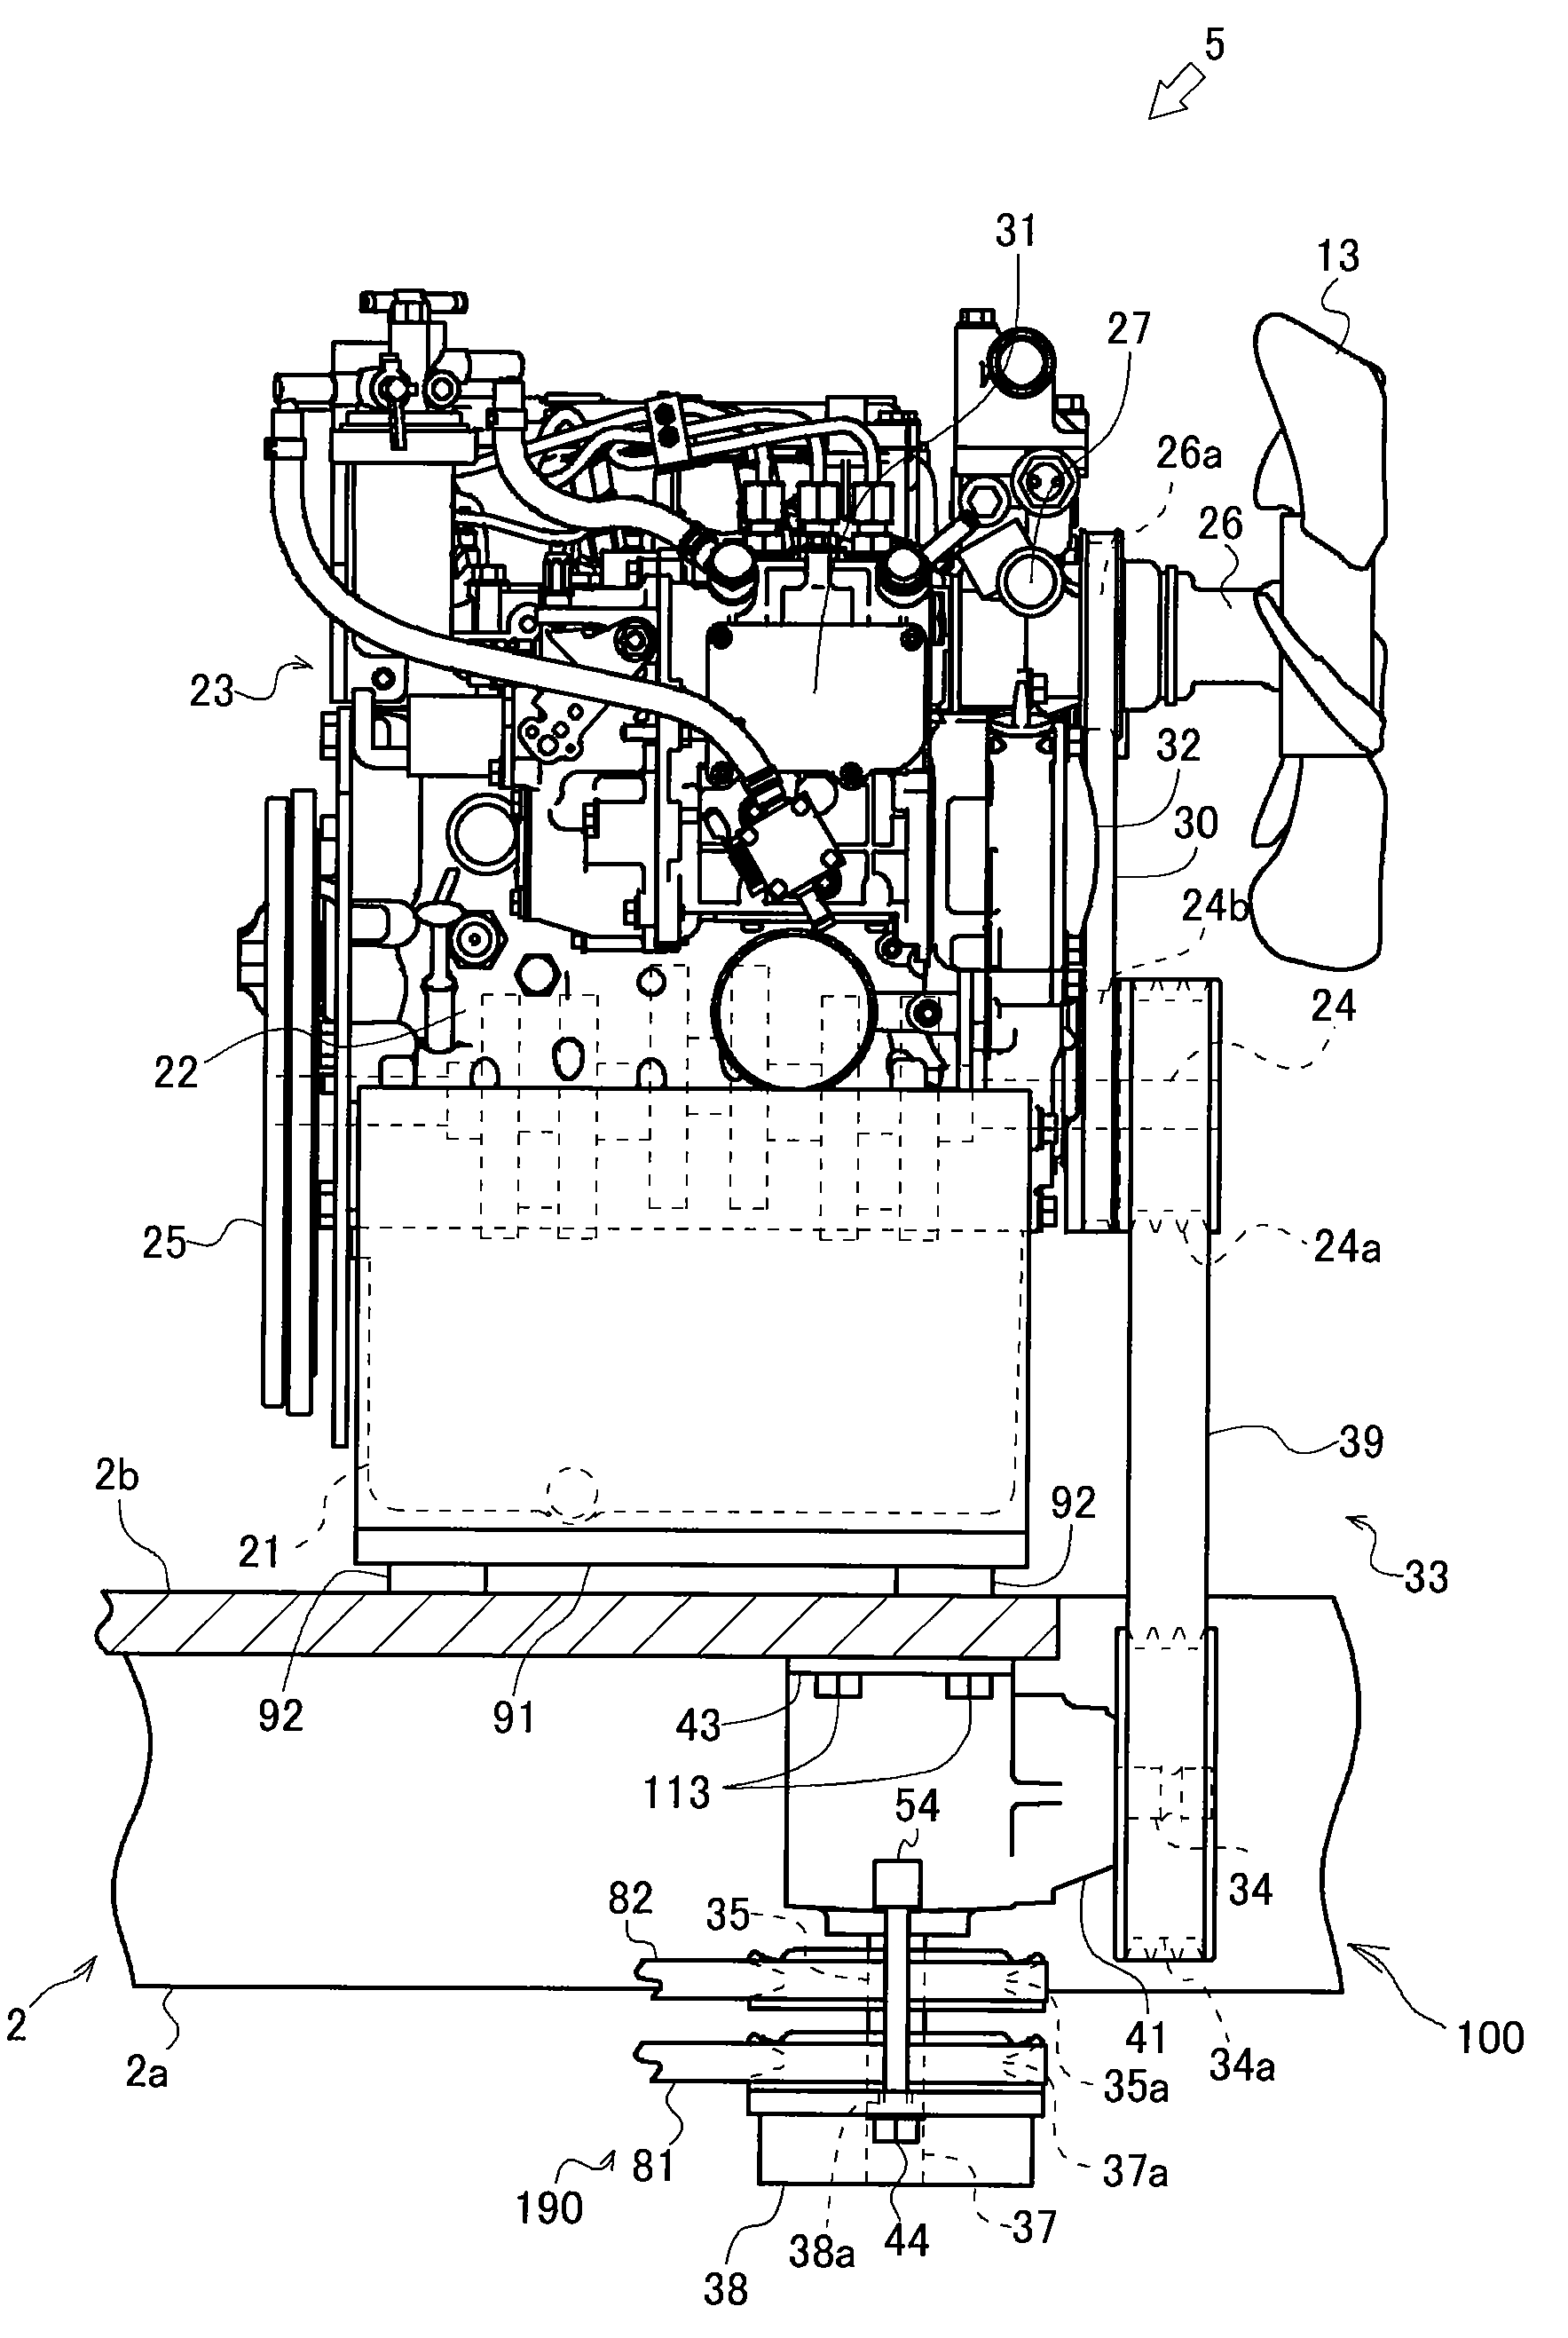 Engine and Power Transmission Device